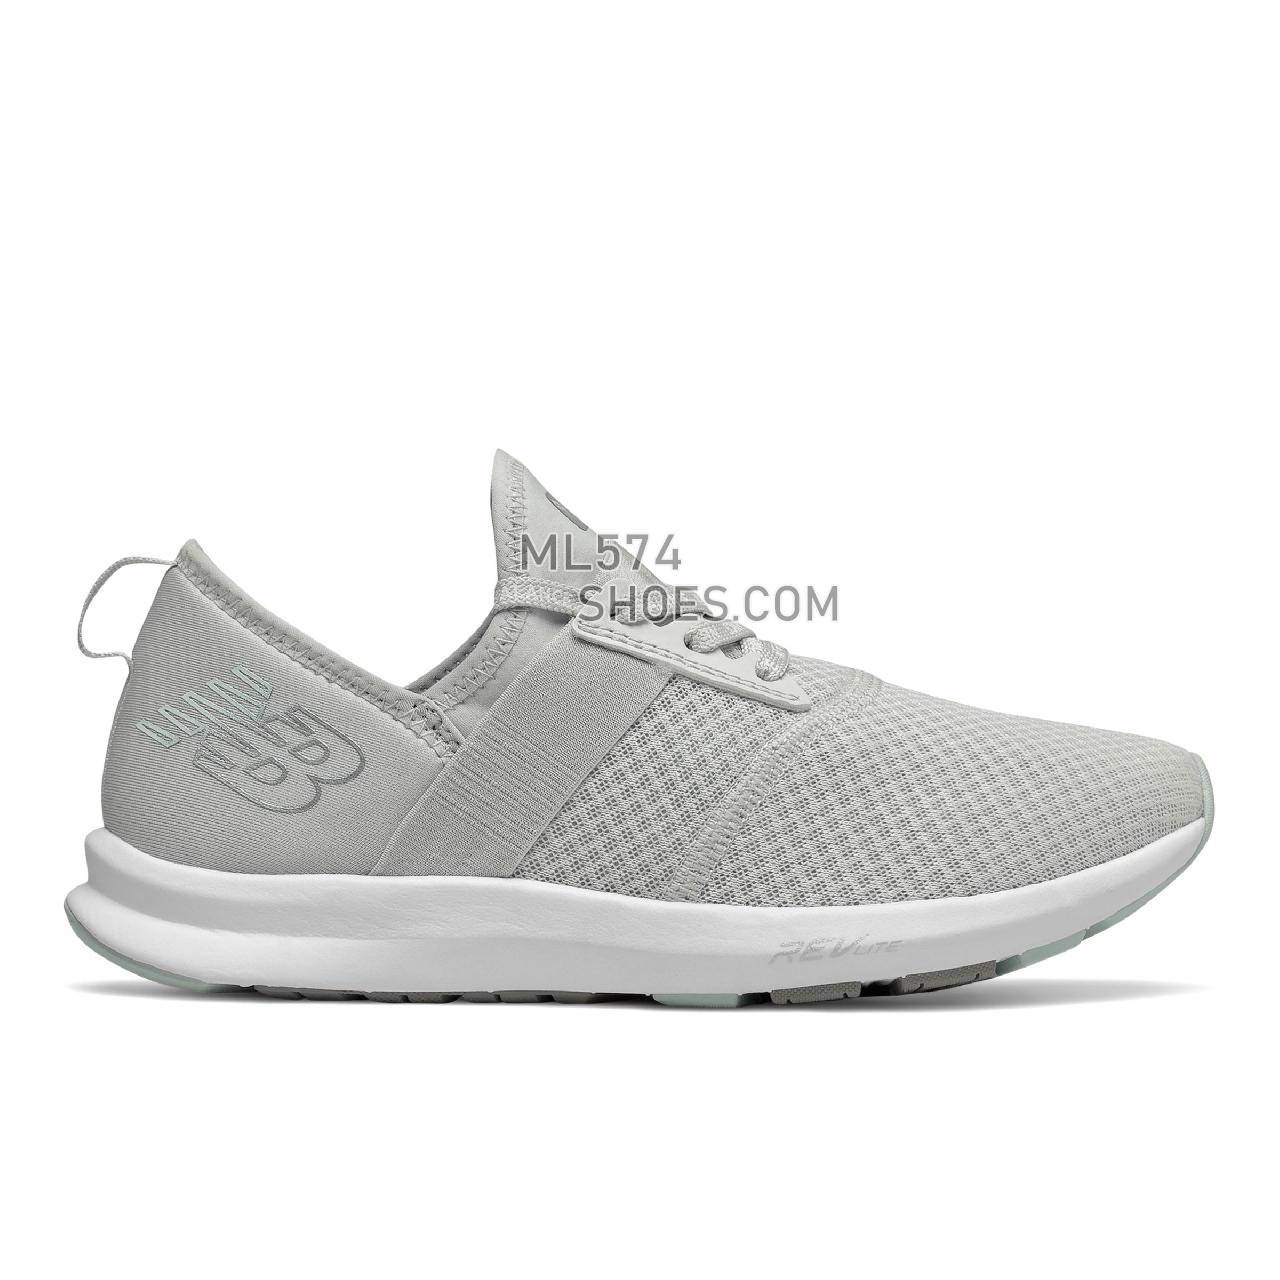 New Balance FuelCore Nergize - Women's Sport Style Sneakers - Summer Fog with Mint Chalk and White - WXNRGSM1